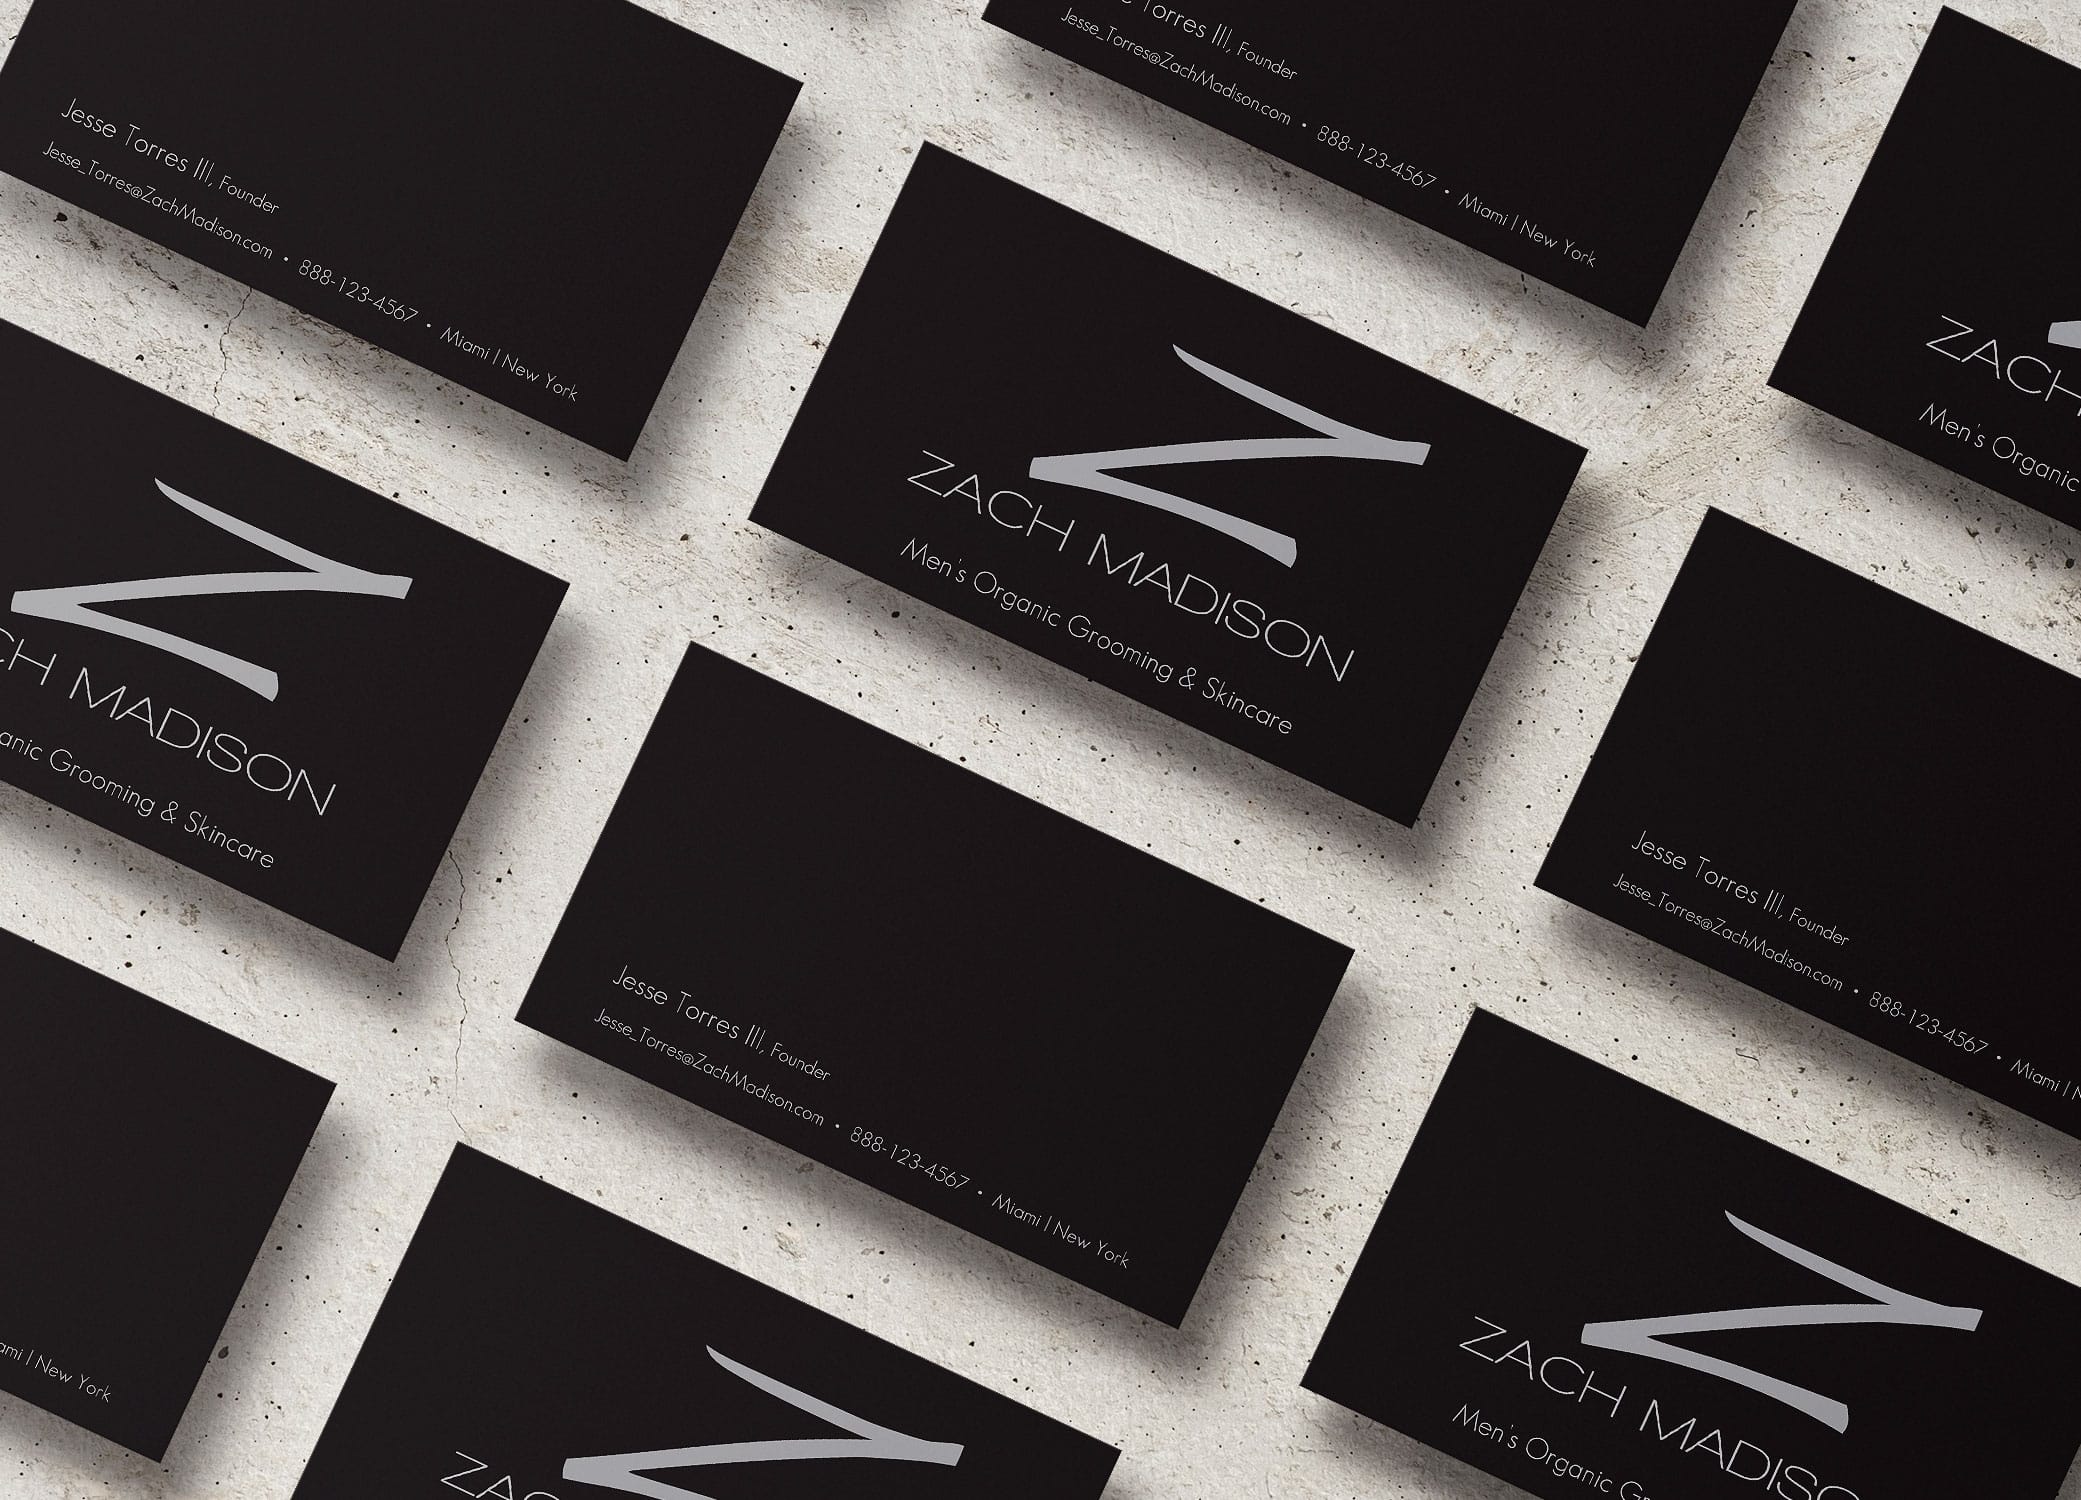 Zach Madison black business cards with metallic 'Z' arranged in slanted rows showing front and back on granite backdrop.